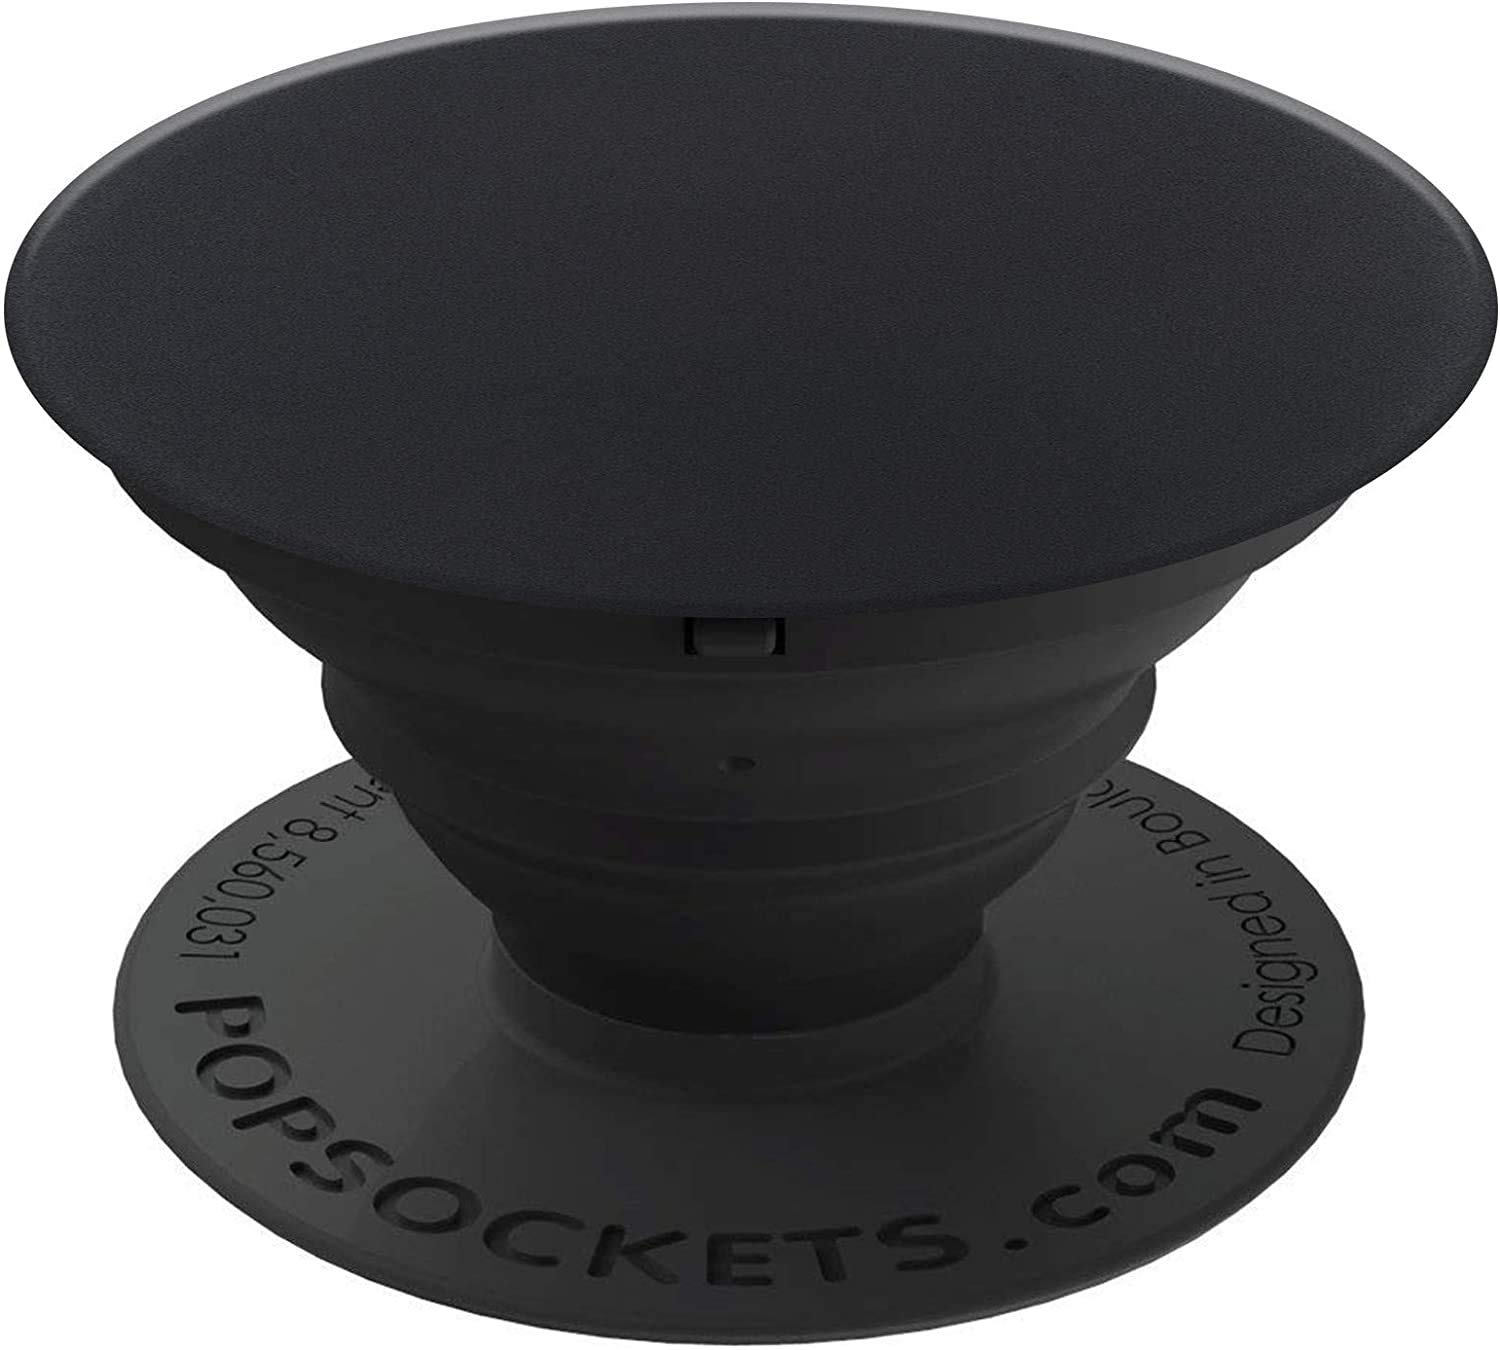 Book Cover PopSockets: Collapsible Grip & Stand for Phones and Tablets - Black Black PopSockets